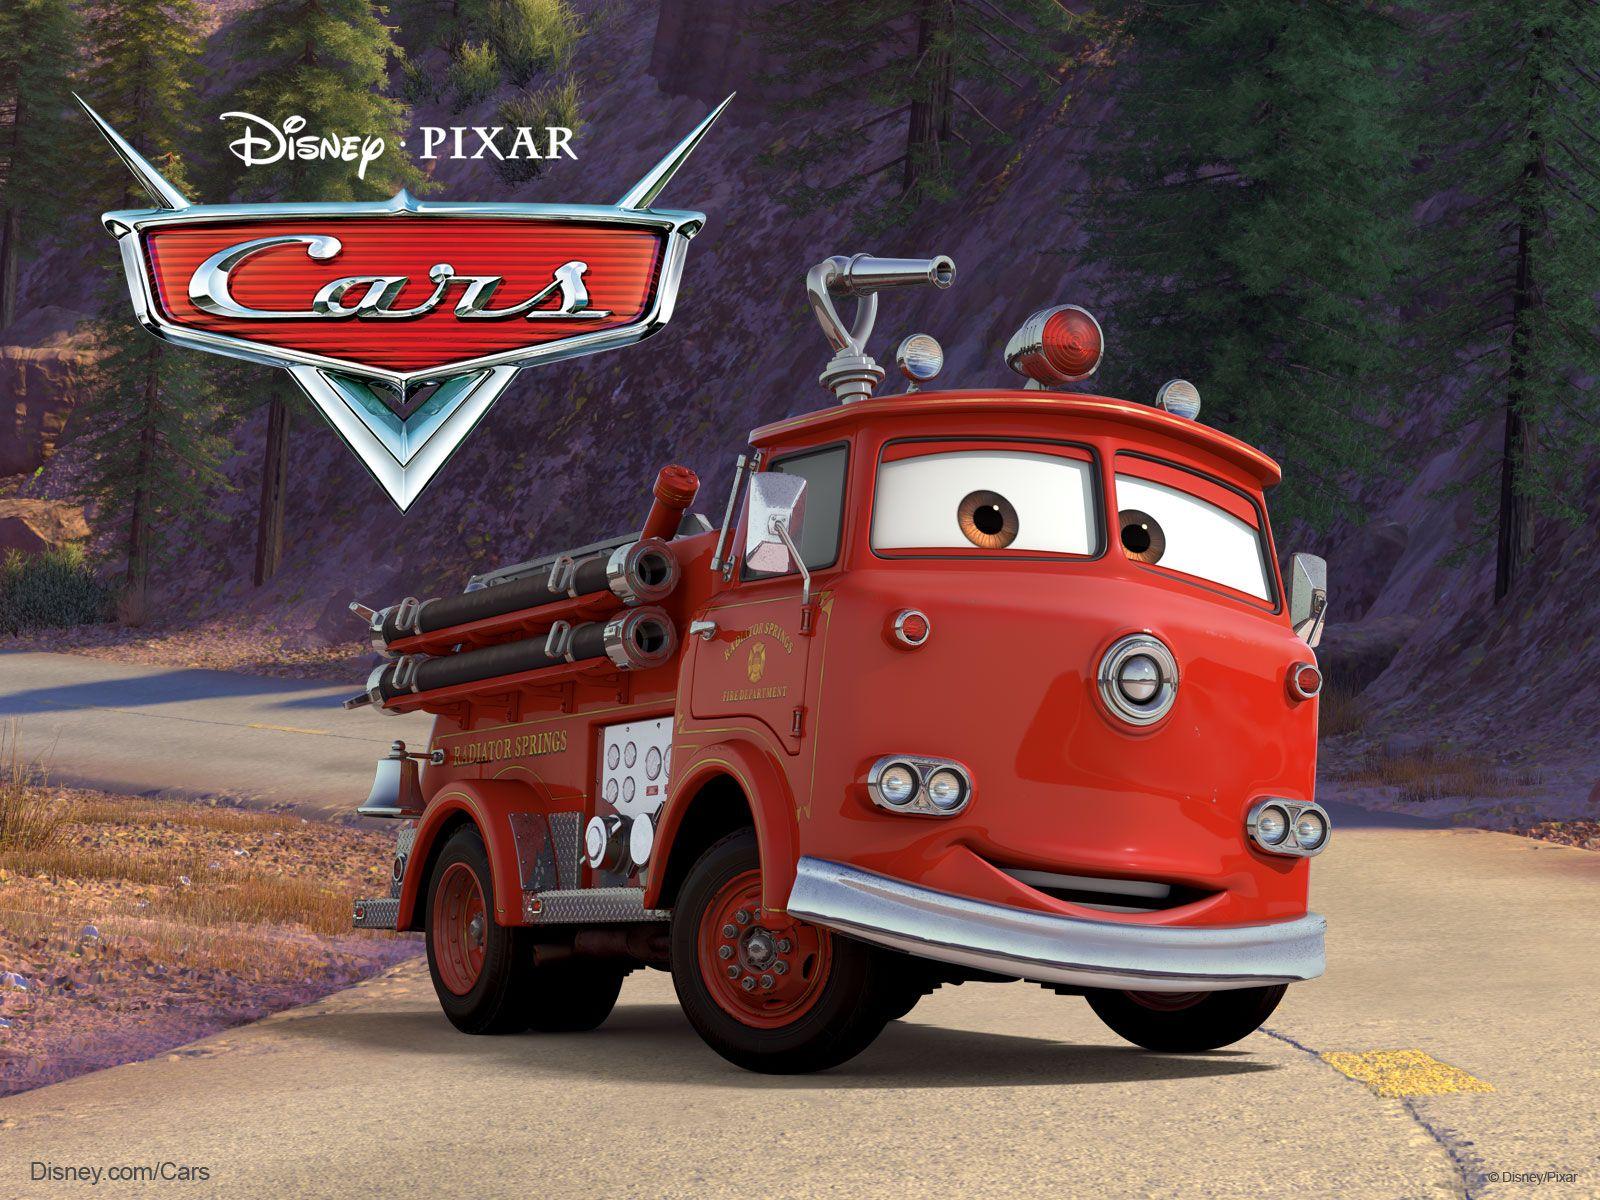 Red the Fire Engine from Pixar Cars Cartoon Film Wallpaper HD Free